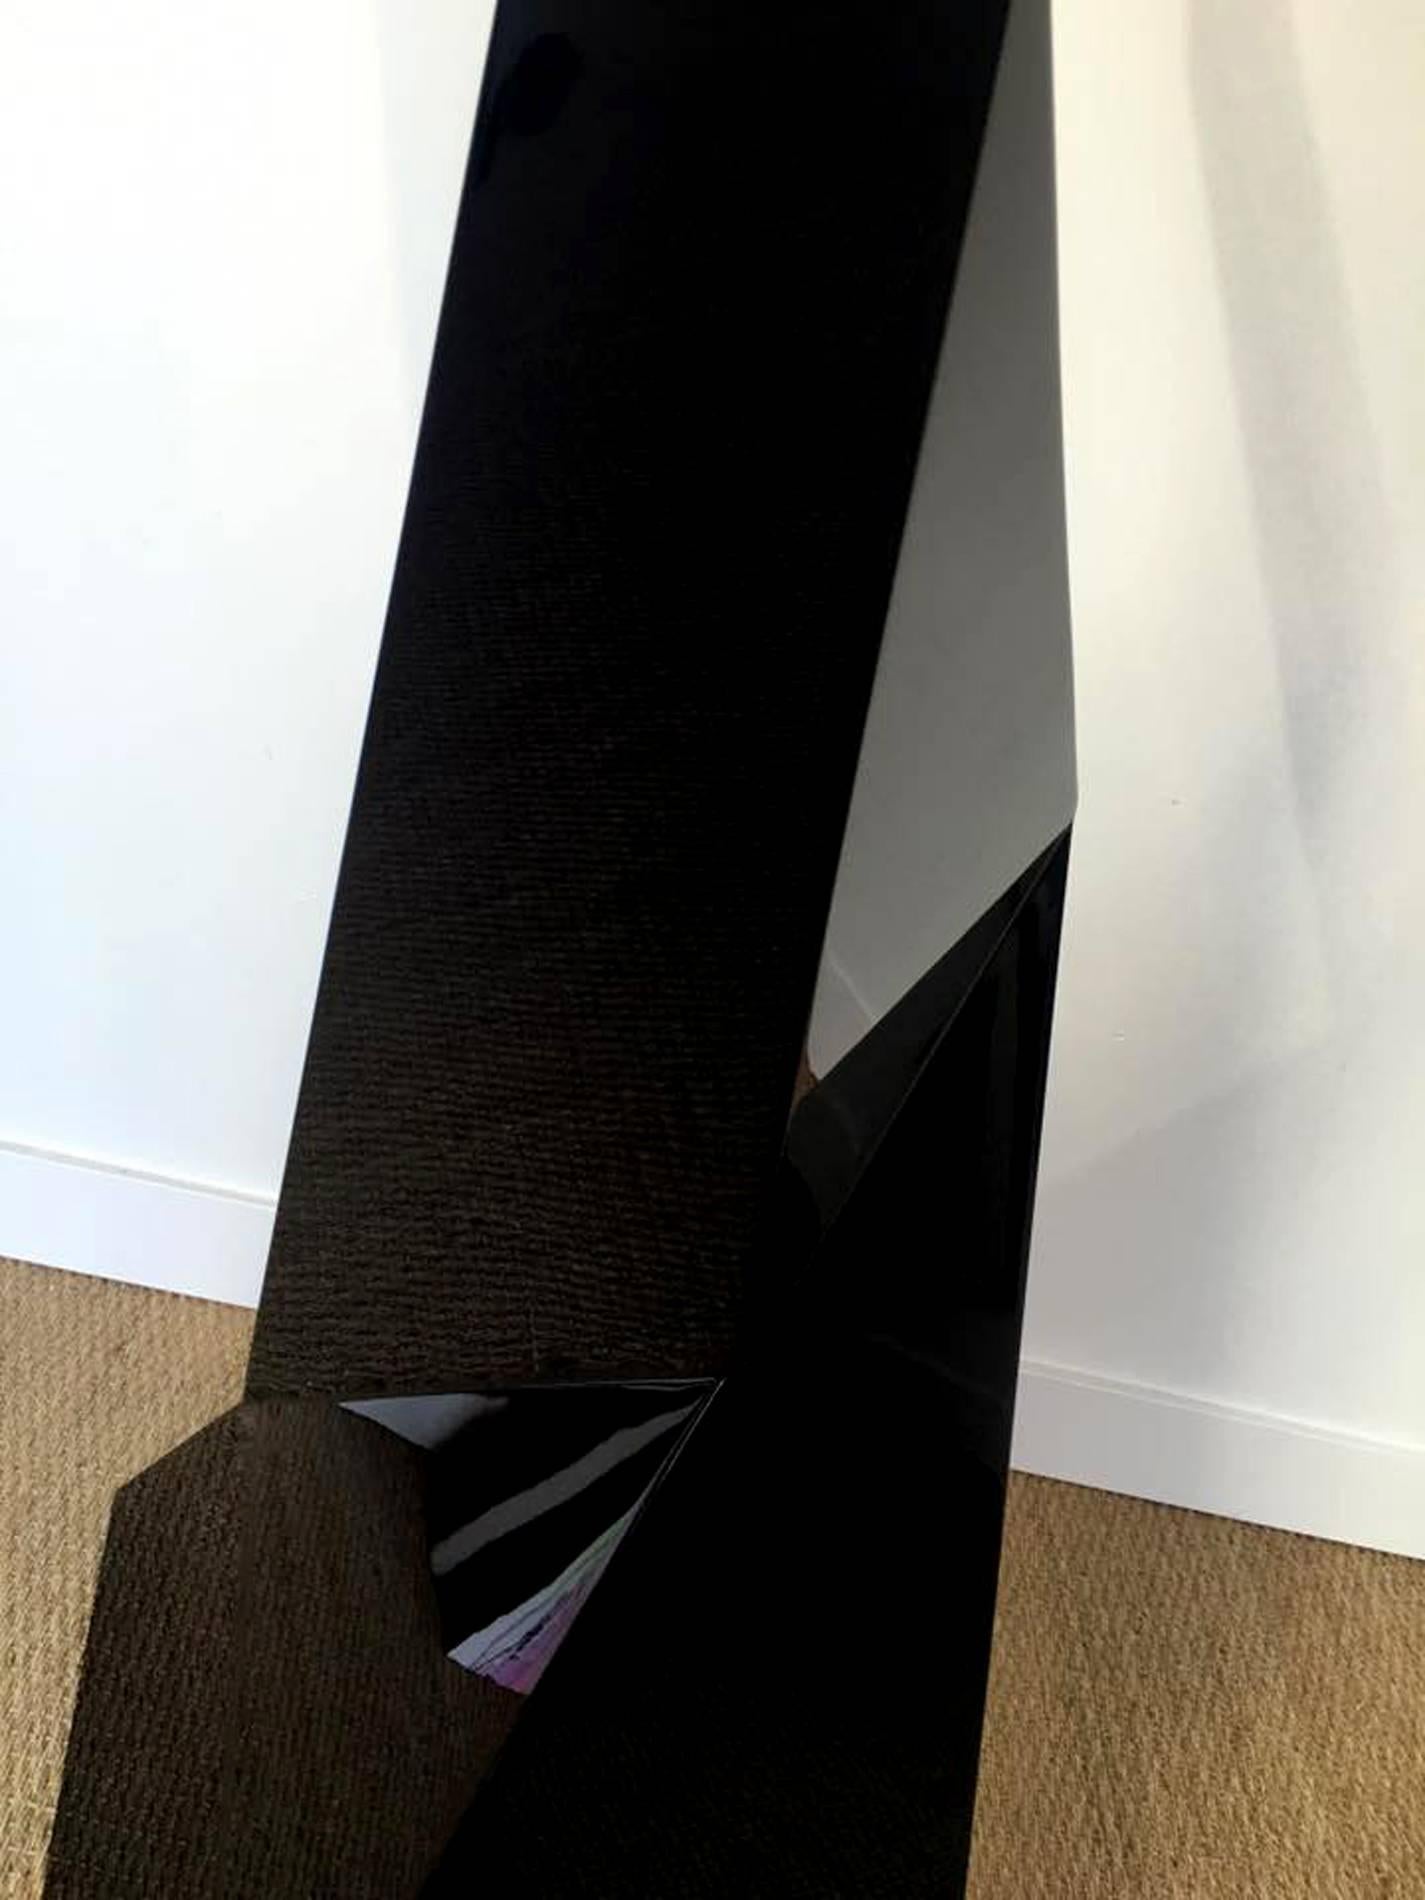 American Exceptional Abstract Sculpture by Artist Robert Marion